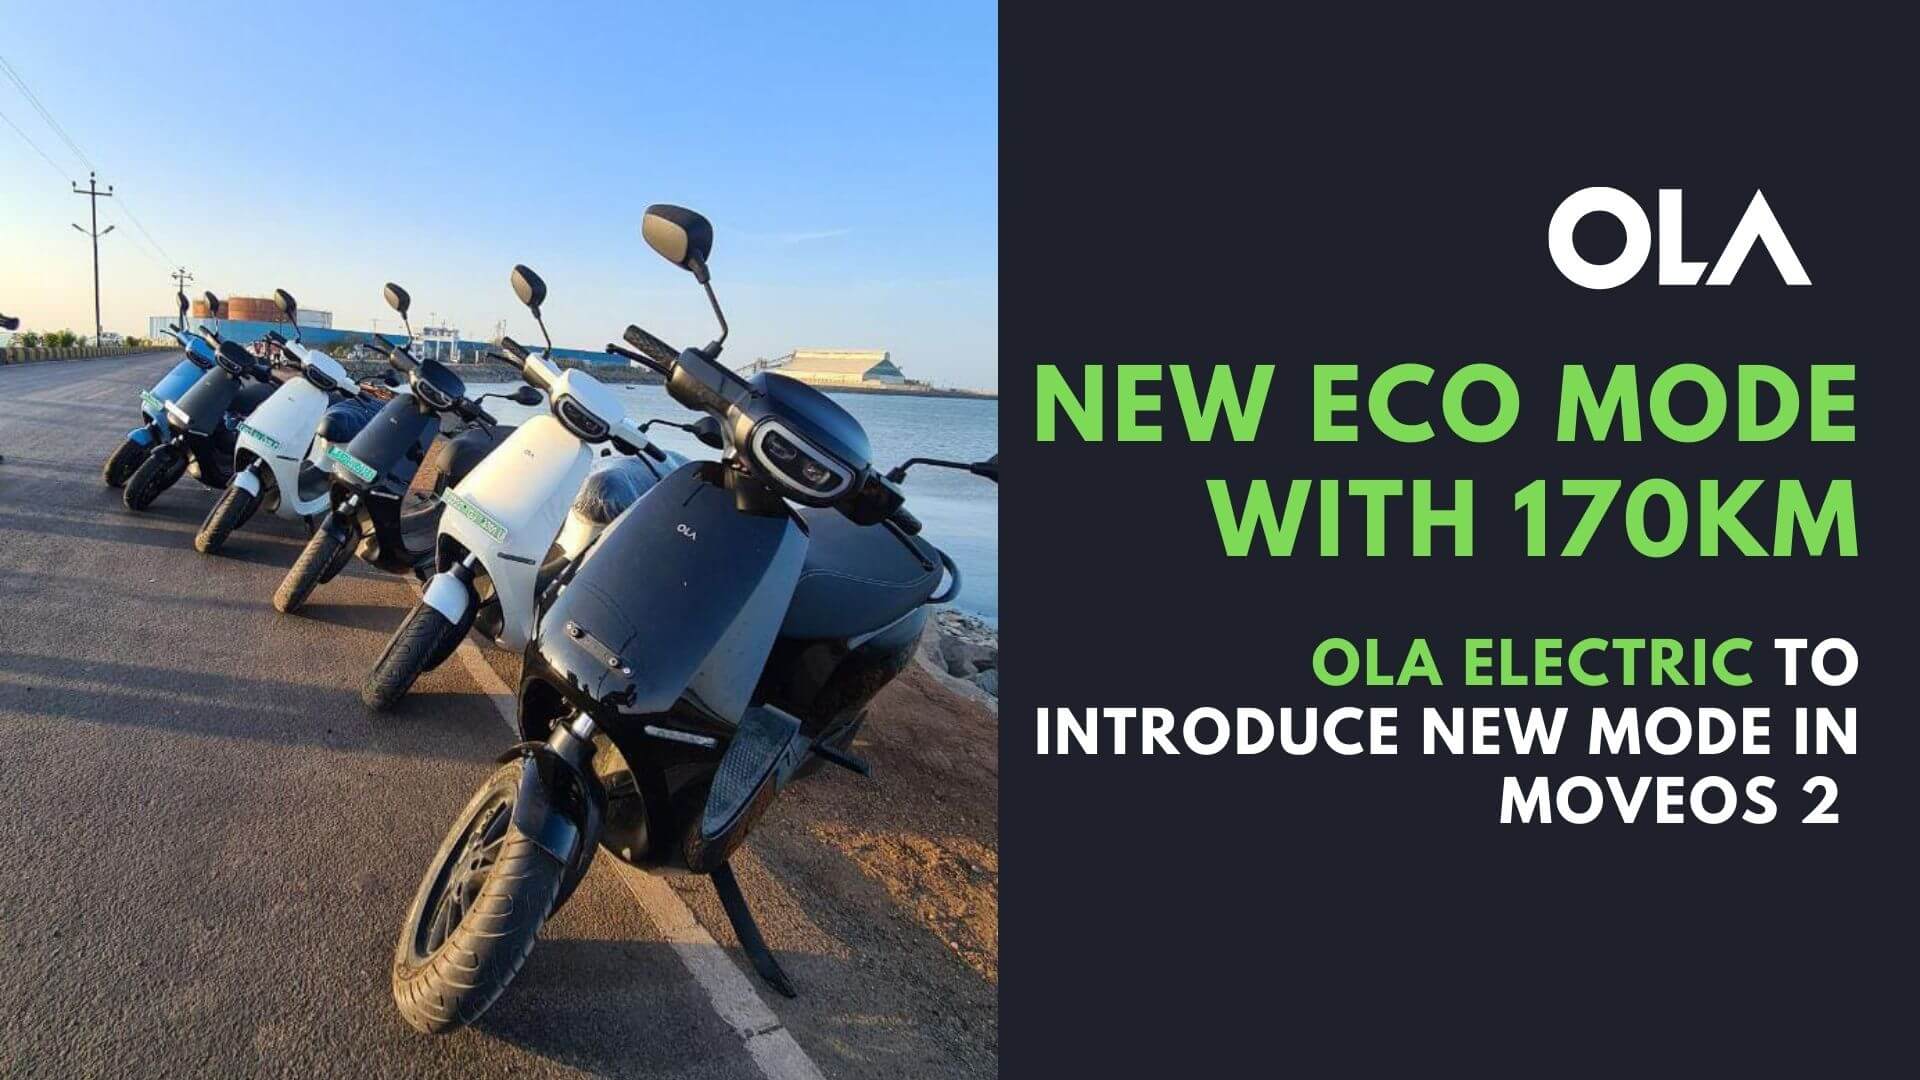 https://e-vehicleinfo.com/ola-electric-to-introduce-new-mode-in-moveos-2-eco-mode-with-170km/